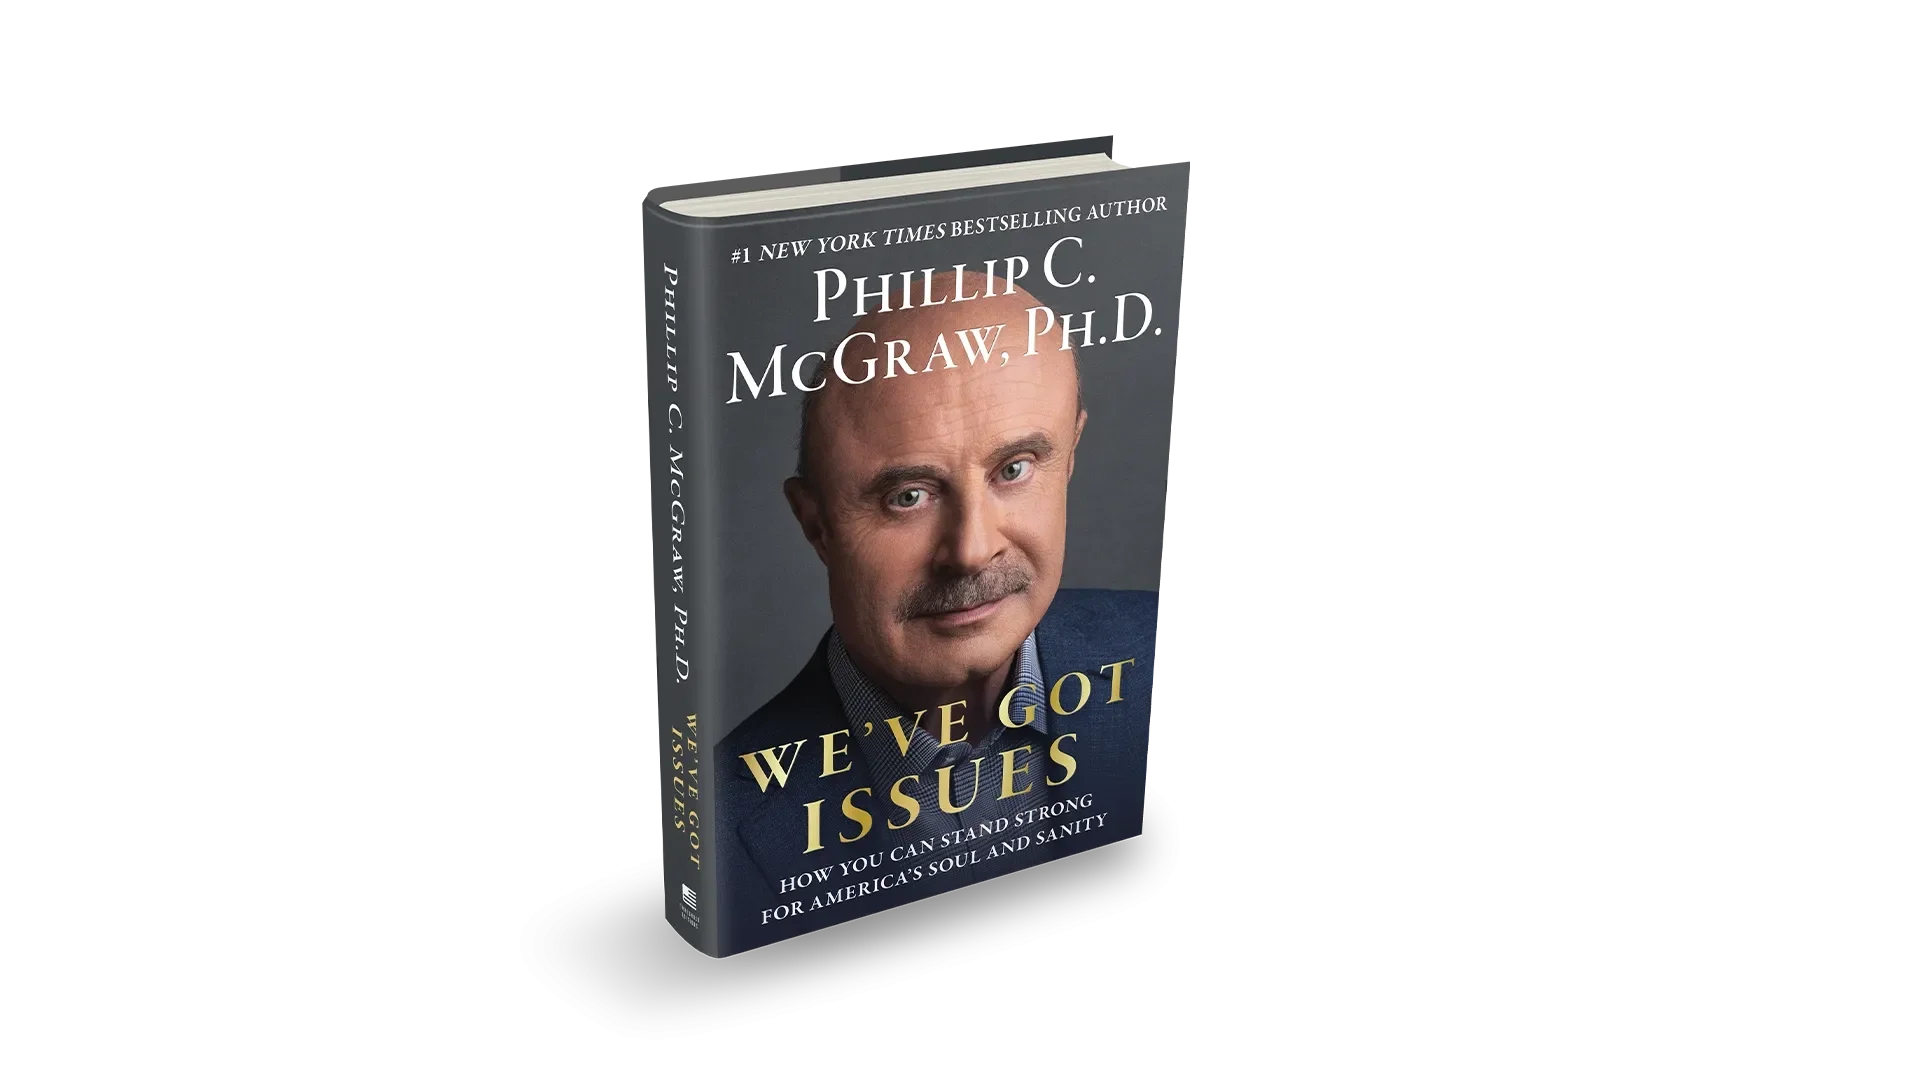 We’ve Got Issues: How You Can Stand Strong for America’s Soul and Sanity by Dr. Phil by TBN